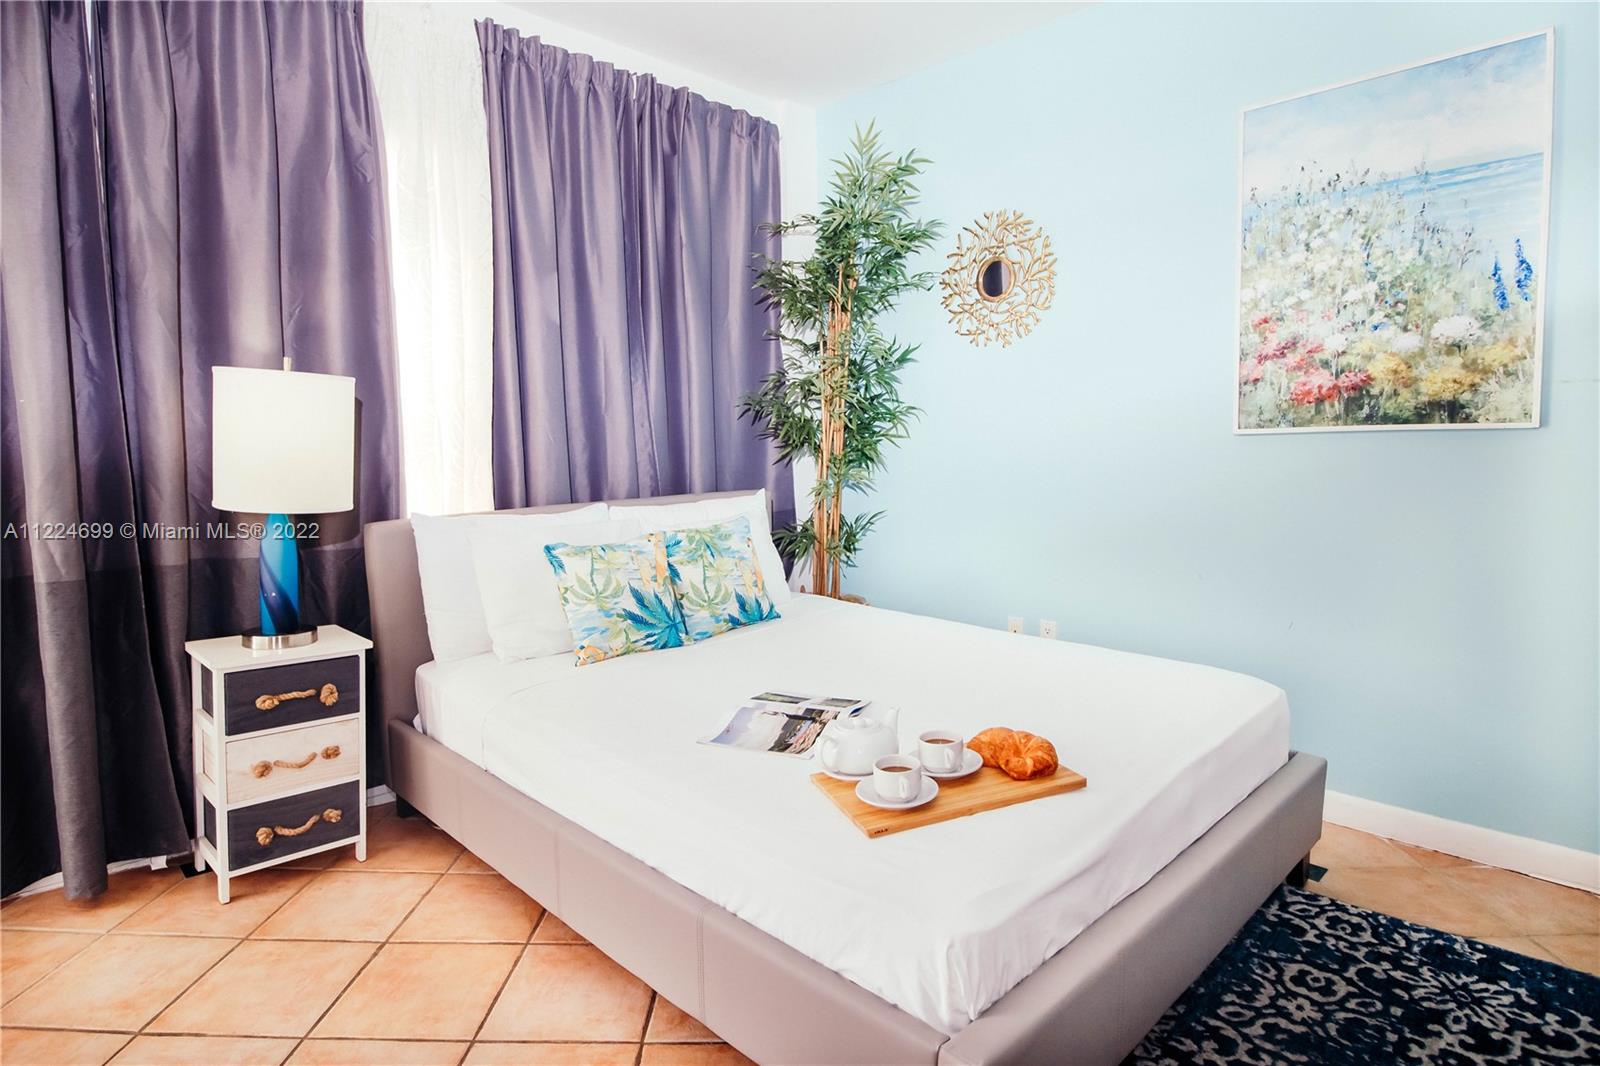 Great opportunity for investors!!!! DAILY RENTALS allowed. In the heart of South Beach, nightlife, ocean across the street, restaurants, Art Deco district. Unit located on the iconic Ocean Dr. Ideal location for ArBnB/Vrbo.